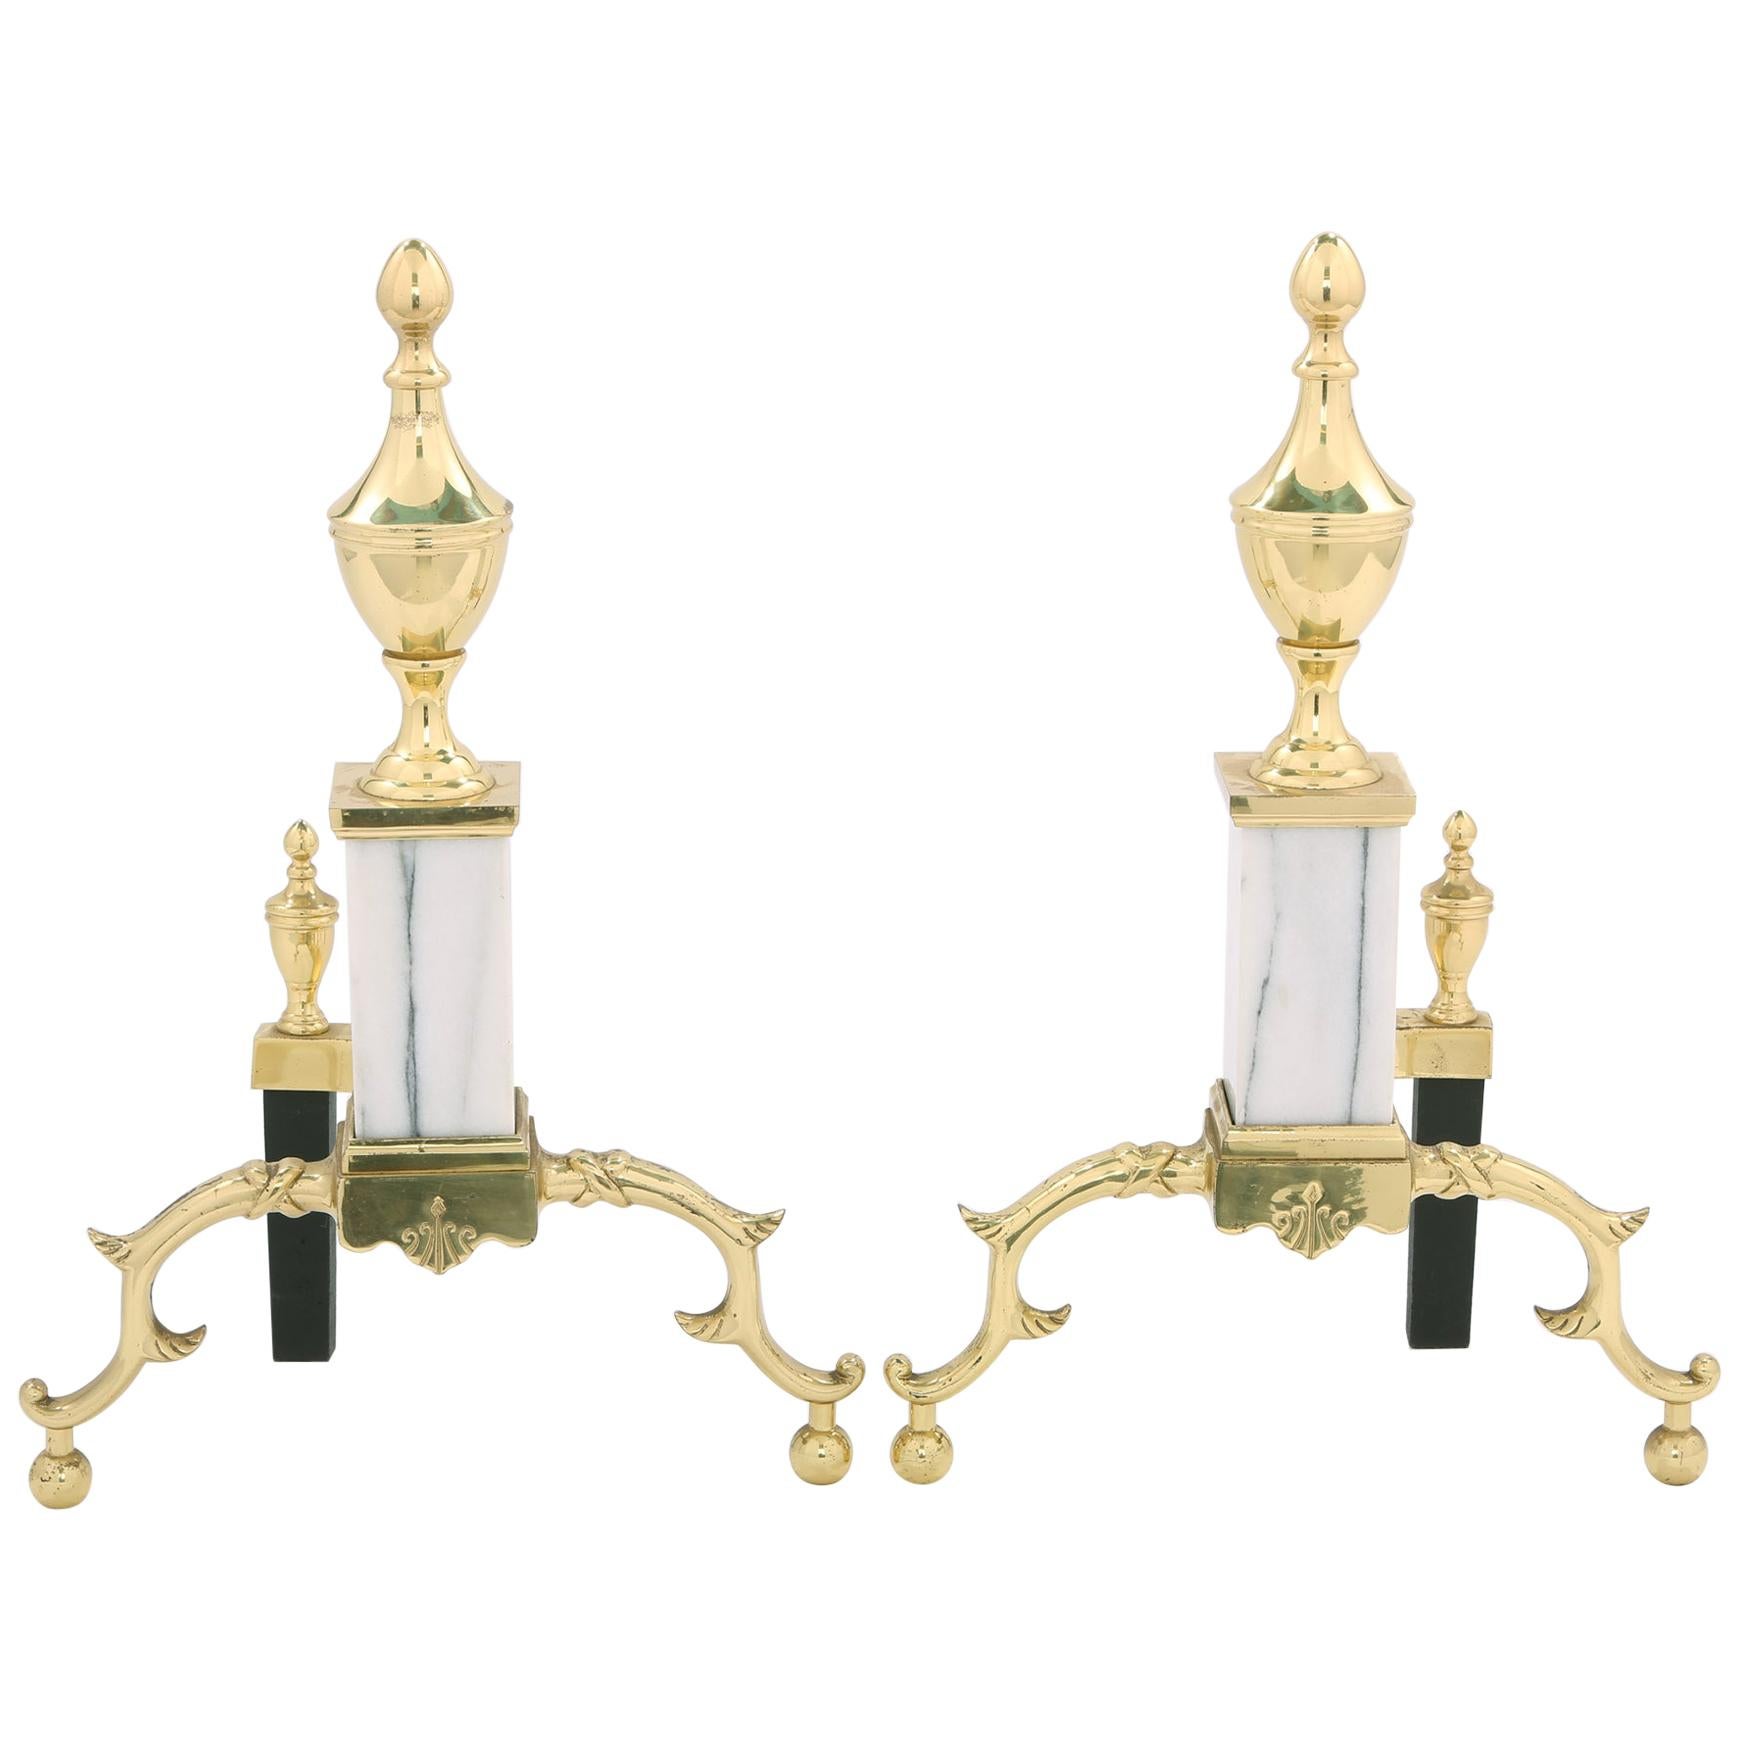 Solid Brass / Marble Pair Regency Style Andirons 